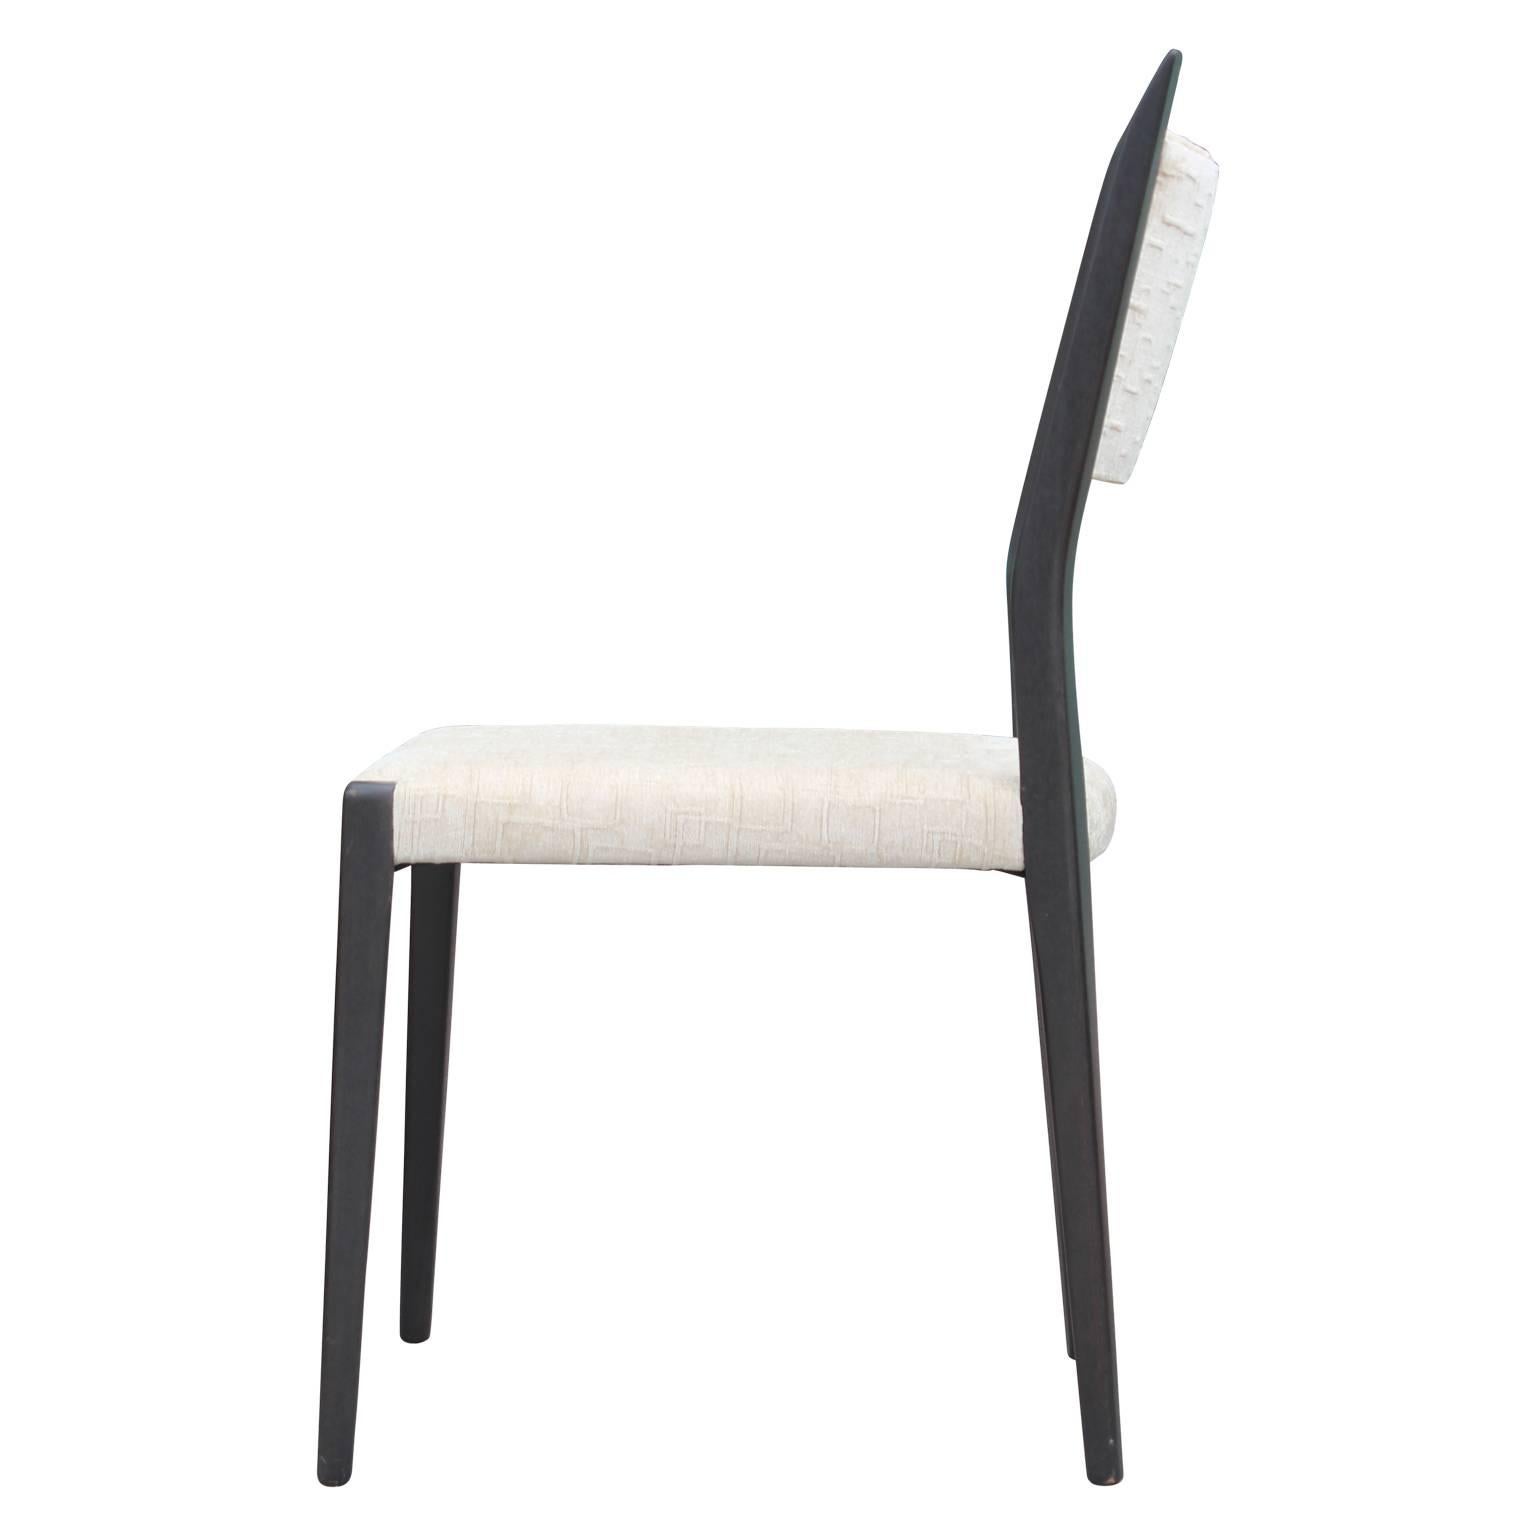 Mid-20th Century Modern Set of Four Paul McCobb for Calvin Black and White Dining Chairs